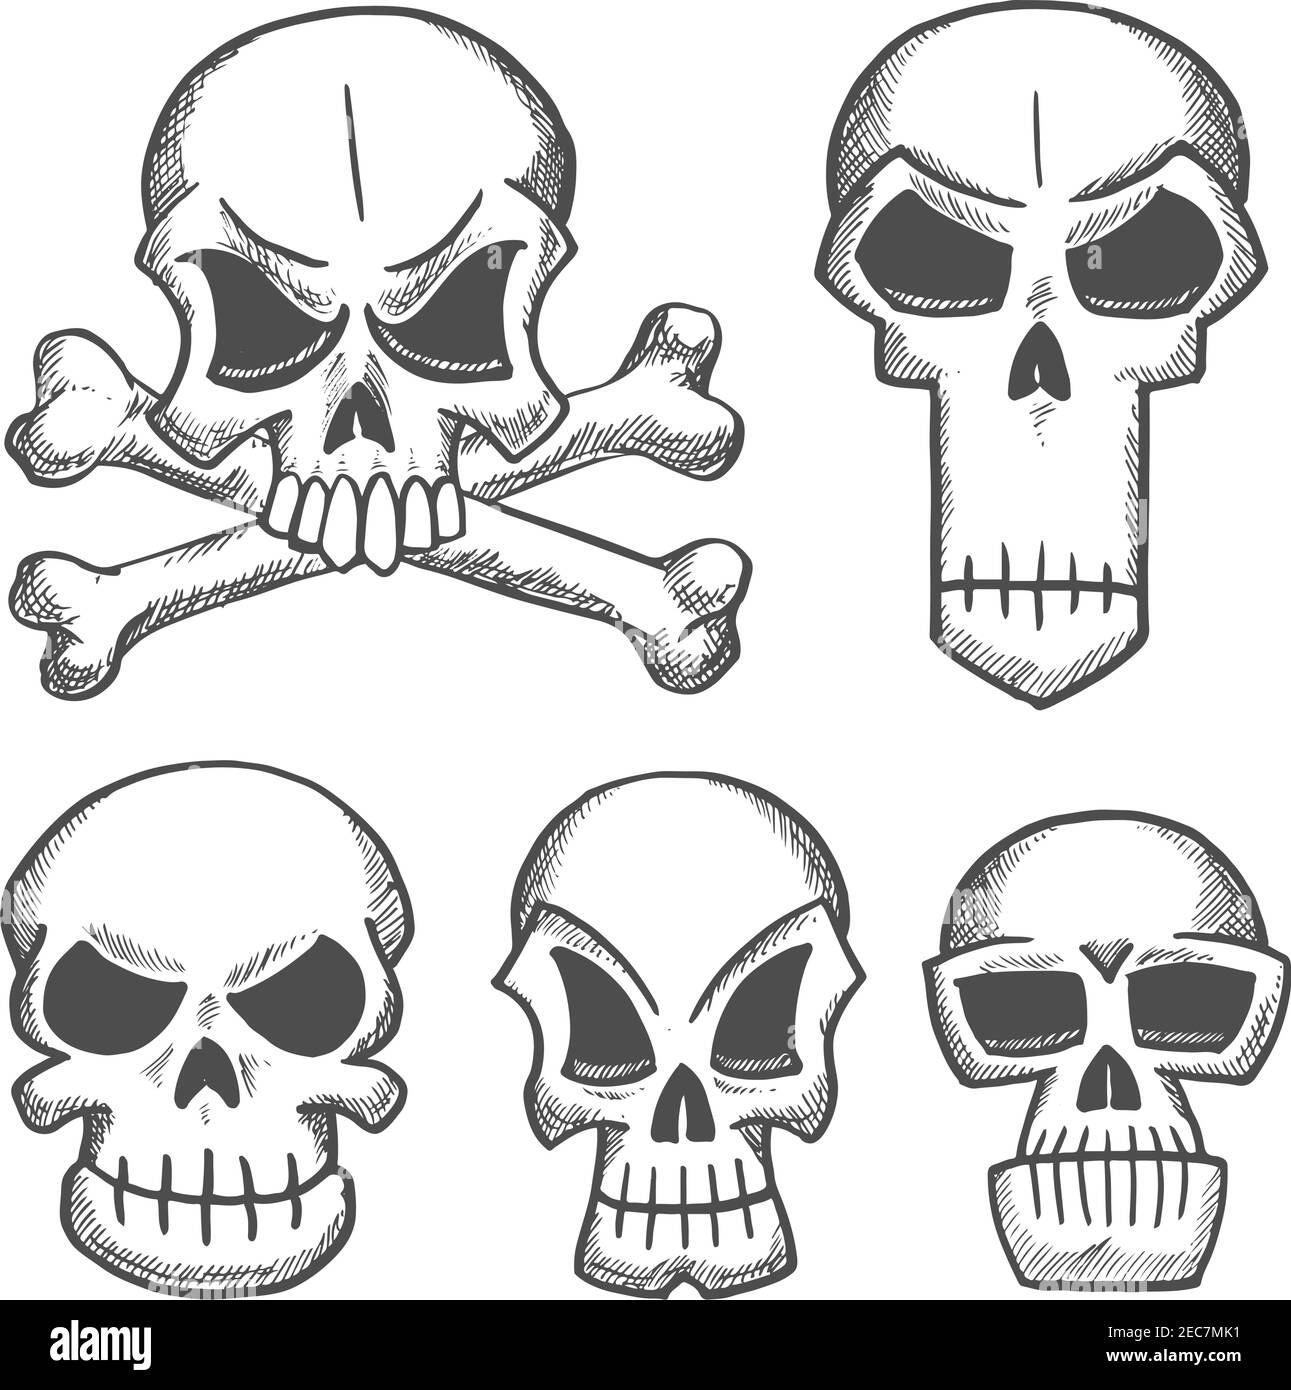 Skulls and craniums with crossbones icons. Vector pencil sketch emblems for cartoon, label, tattoo, halloween decoration Stock Vector